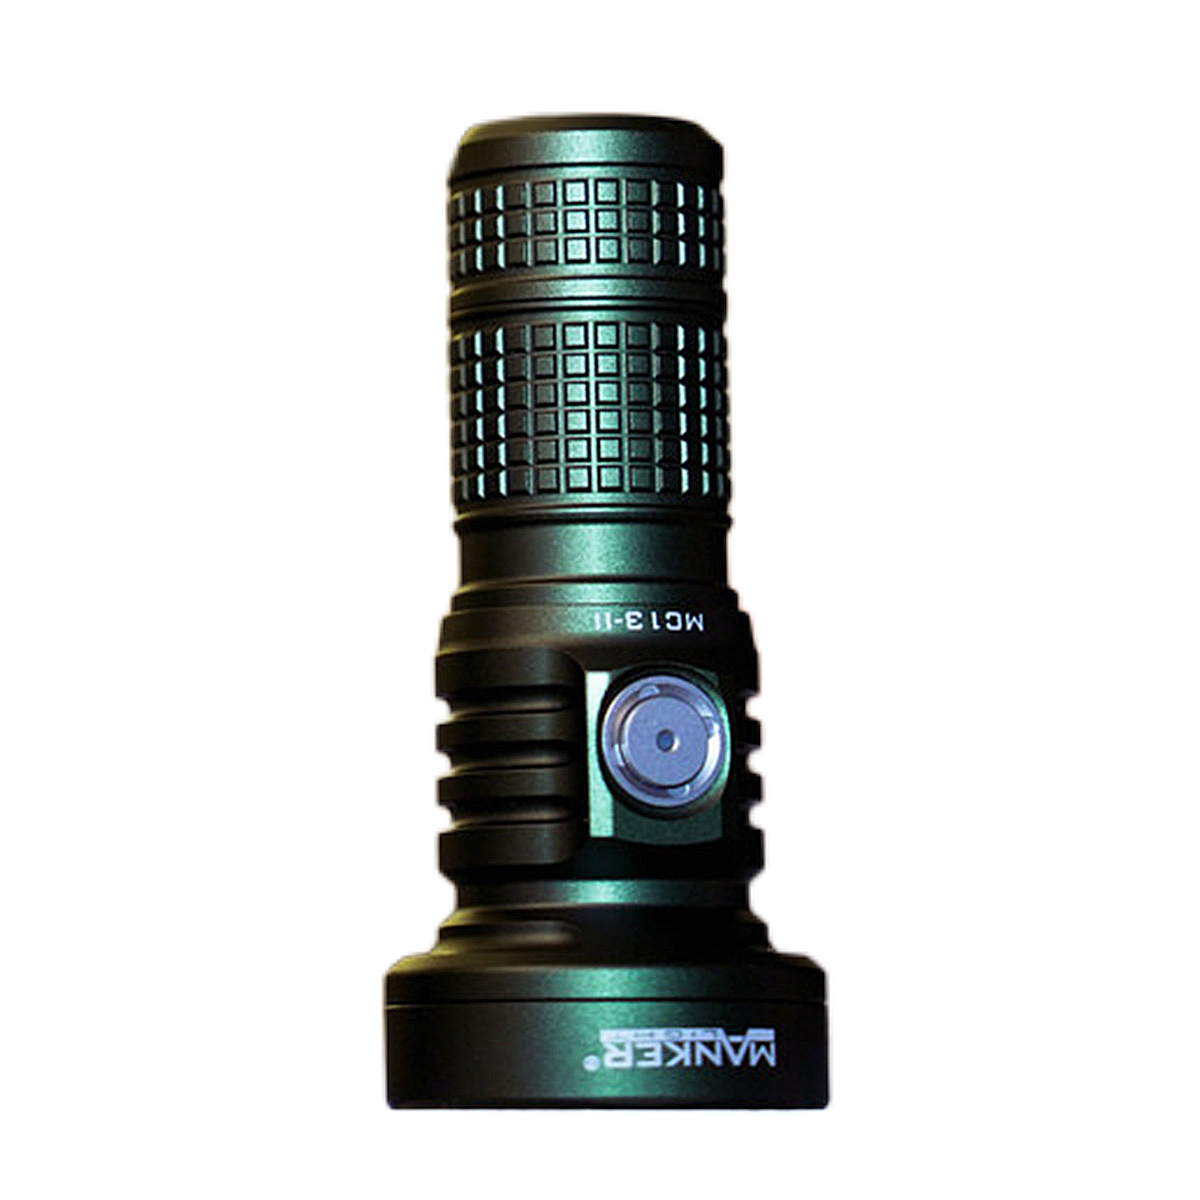 Mankerlight MC13 II SFT40 Edc Flashlight Dual Use 18650 and 18350 Battery PVD Army Green